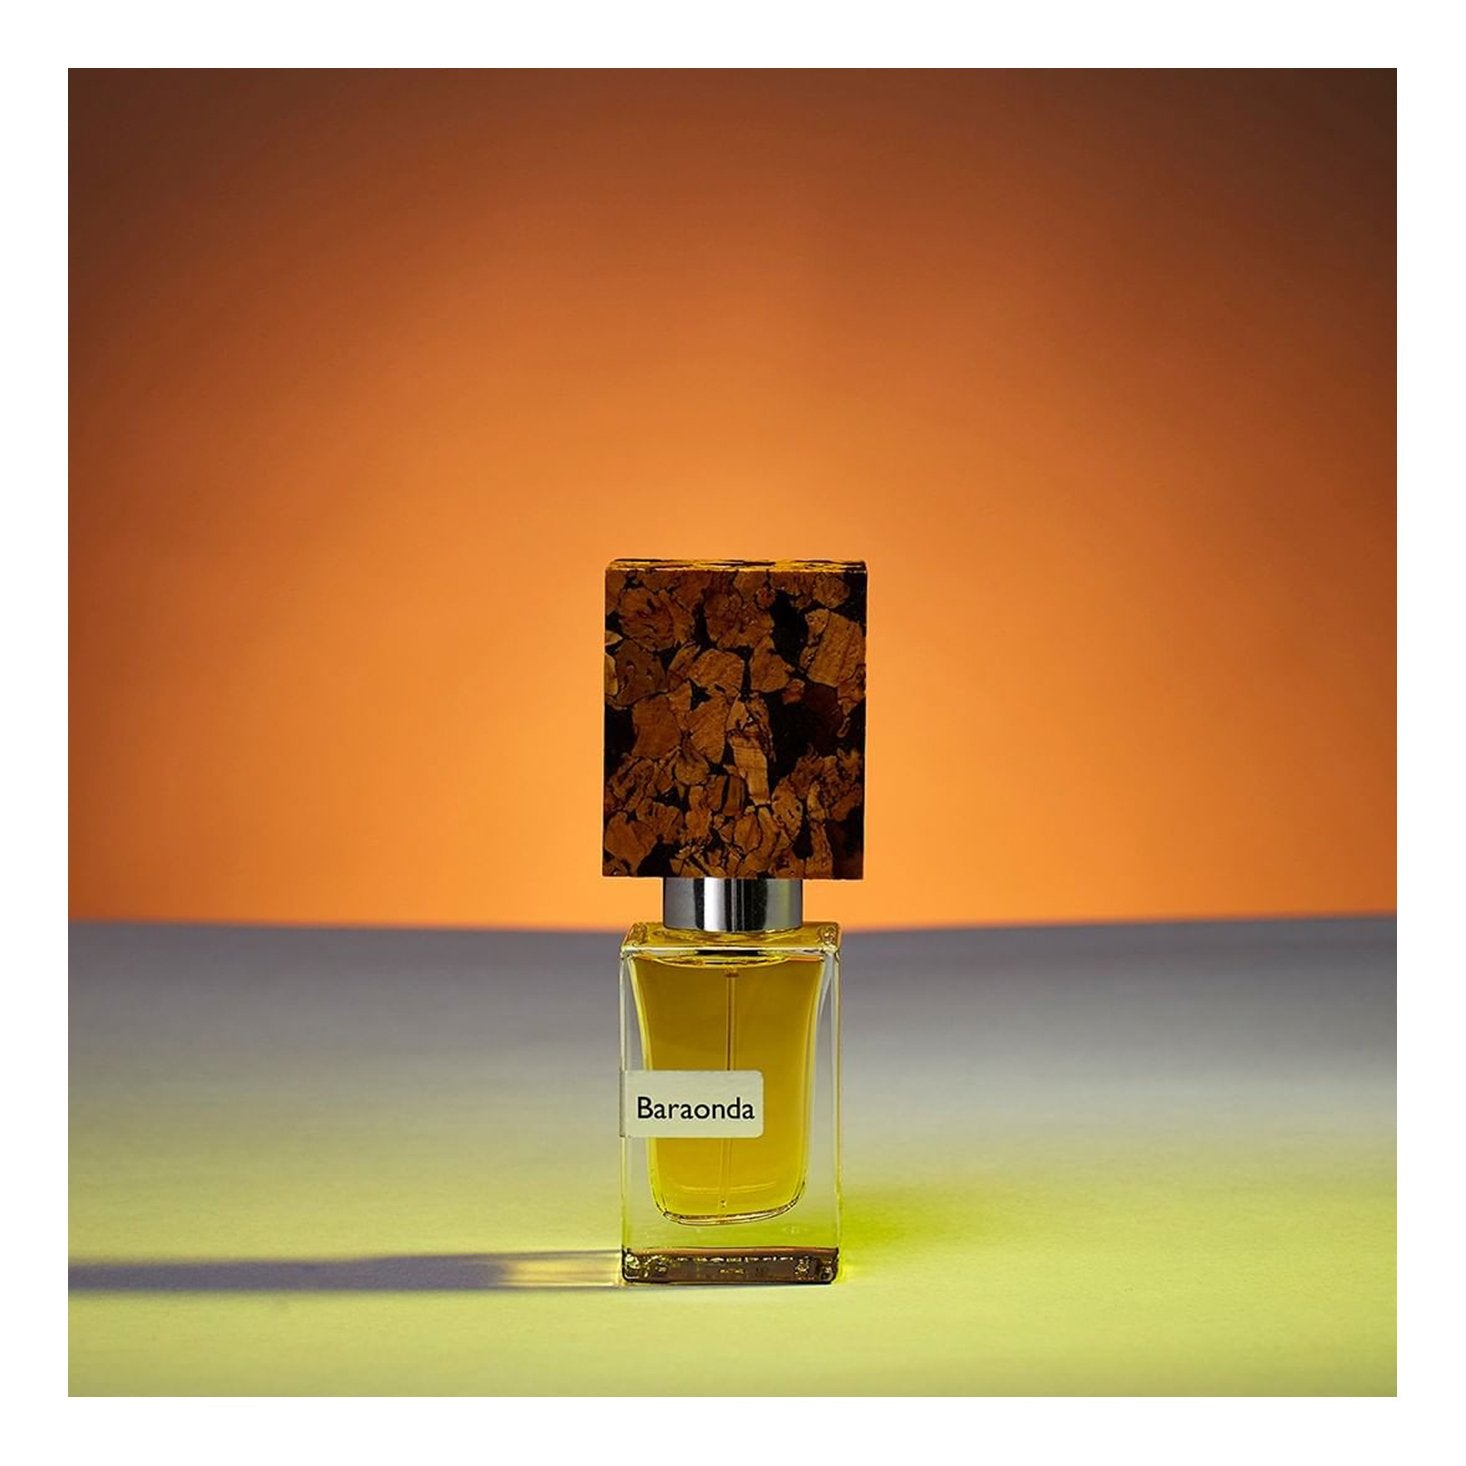 BEON.COM.AU Baraonda by Alessandro Gualtieri is a mysterious addition to the Nasomatto. The name Baraonda means "chaos" or "hype" in Italian, but the perfume itself smells of pleasures of autumn. Delicate glass bowls with red berries, quince and apples apples cooked slowly to fall apart. ... Nasomatto at BEON.COM.AU